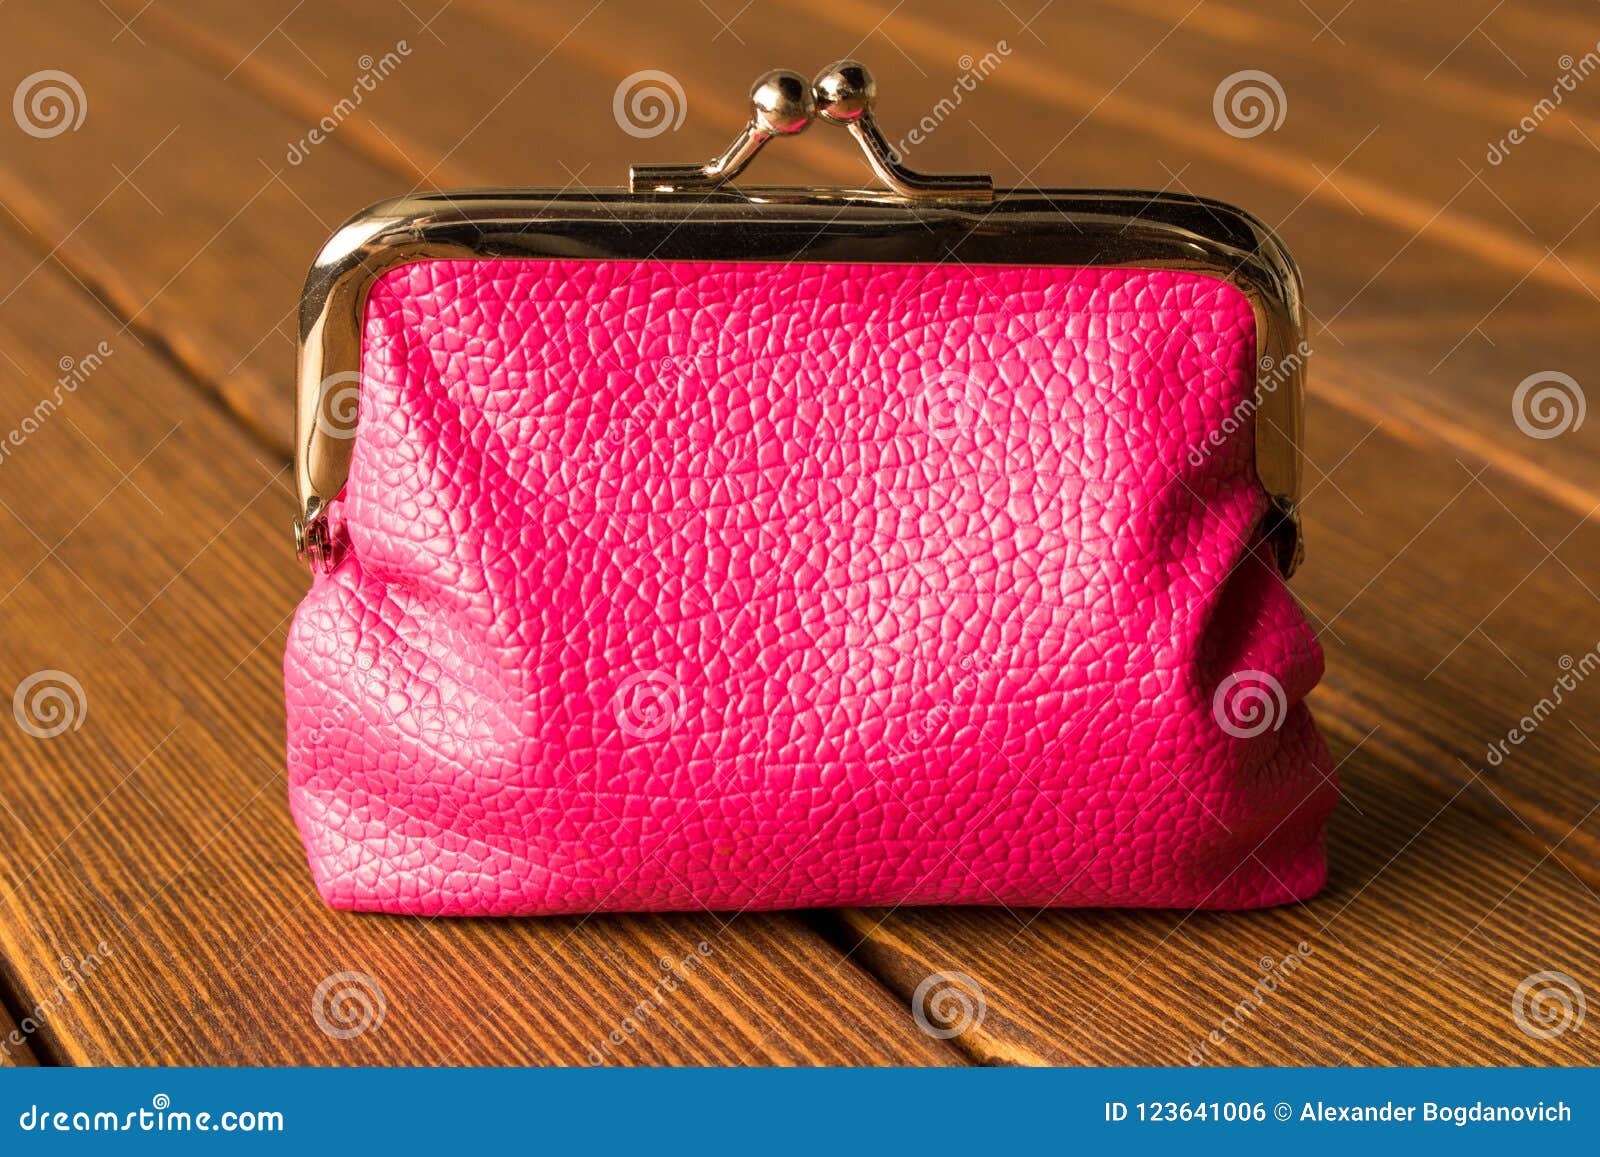 Purse on a Wooden Table . on Wooden Background Stock Photo - Image of ...